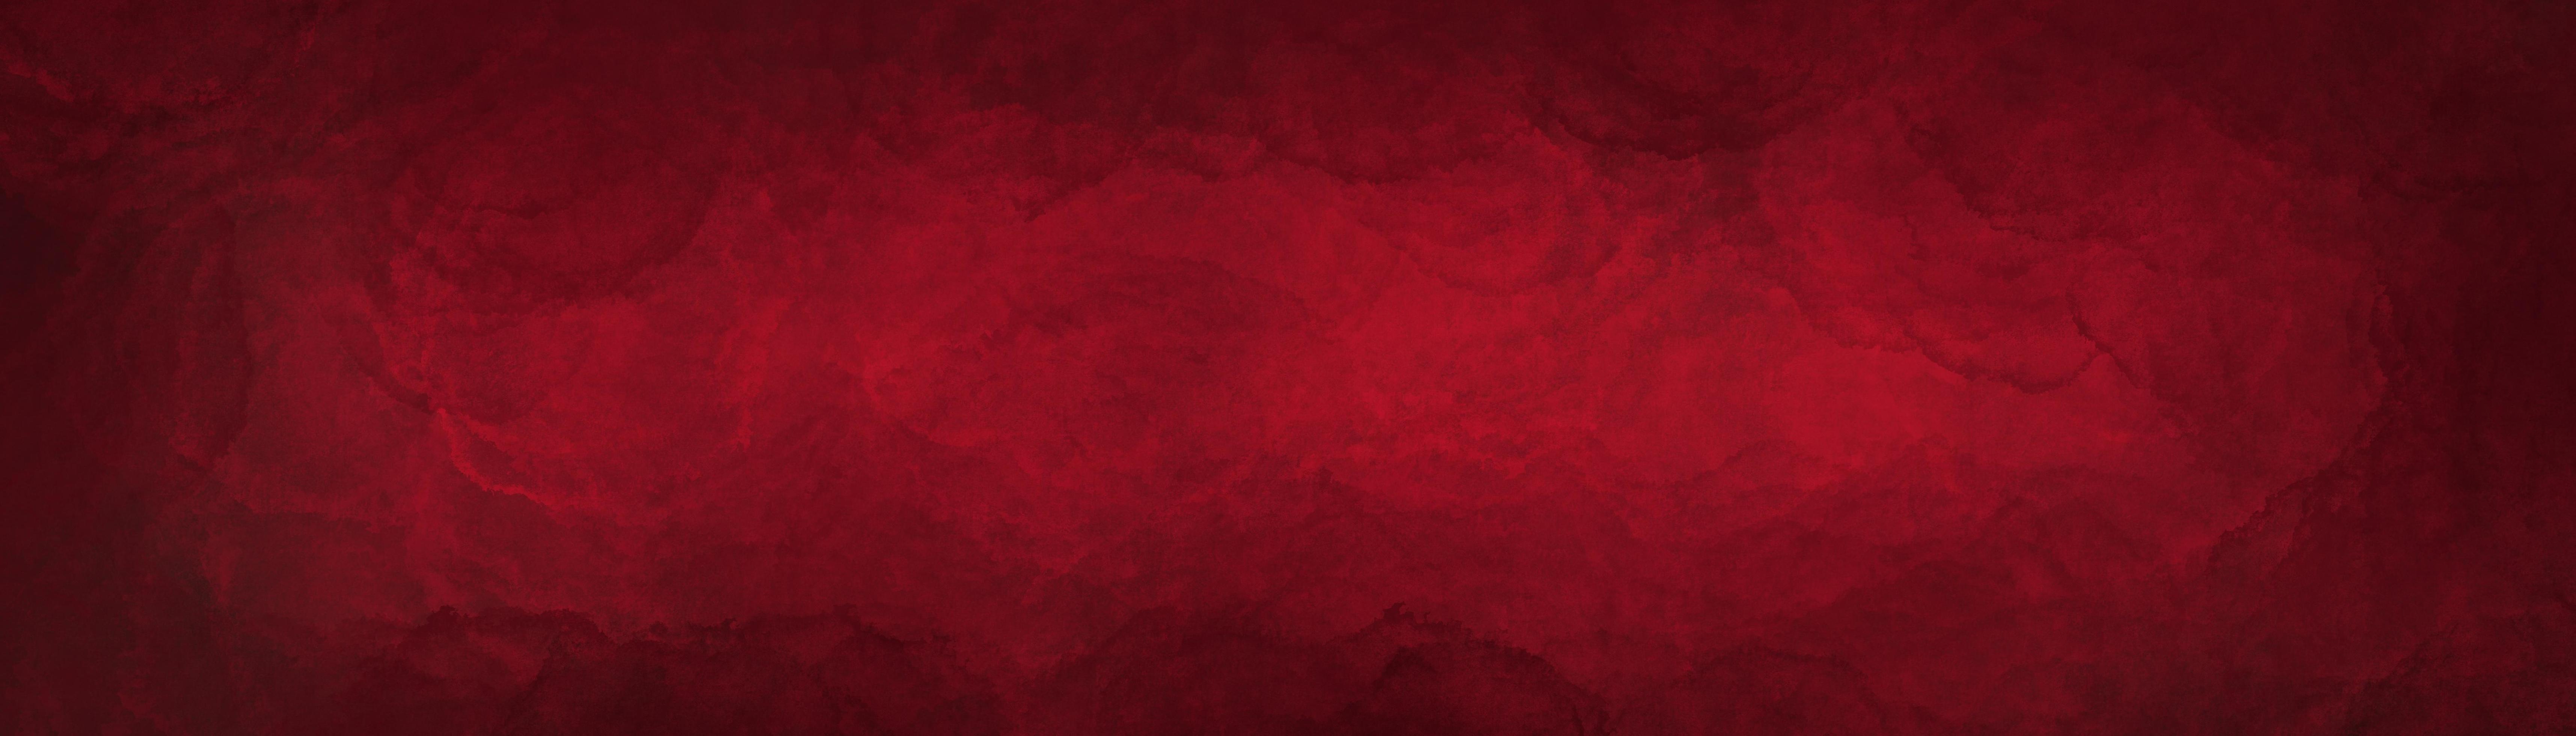 Maroon red felt texture abstract art background. Colored construction paper  surface. Empty space. Stock Photo